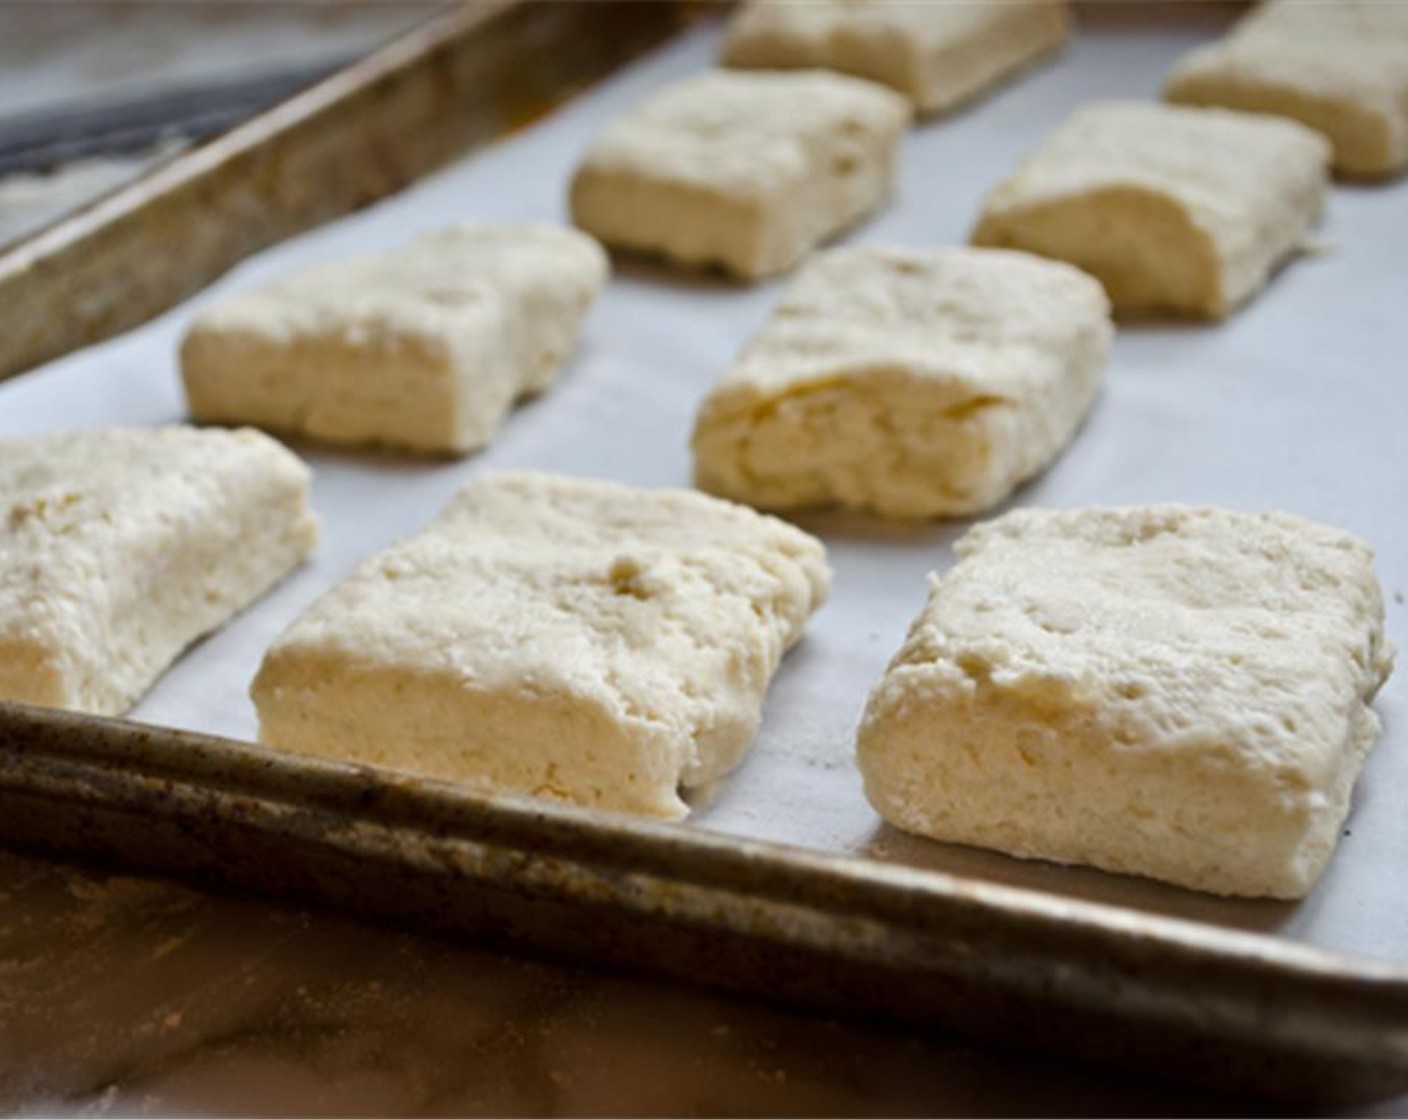 step 8 Dust the blade of a sharp knife with flour and cut the dough into twelve even squares. Transfer to the prepared baking sheet and bake for 12 to 15 minutes, until the biscuits are lightly golden on top and a deeper brown on the bottoms.